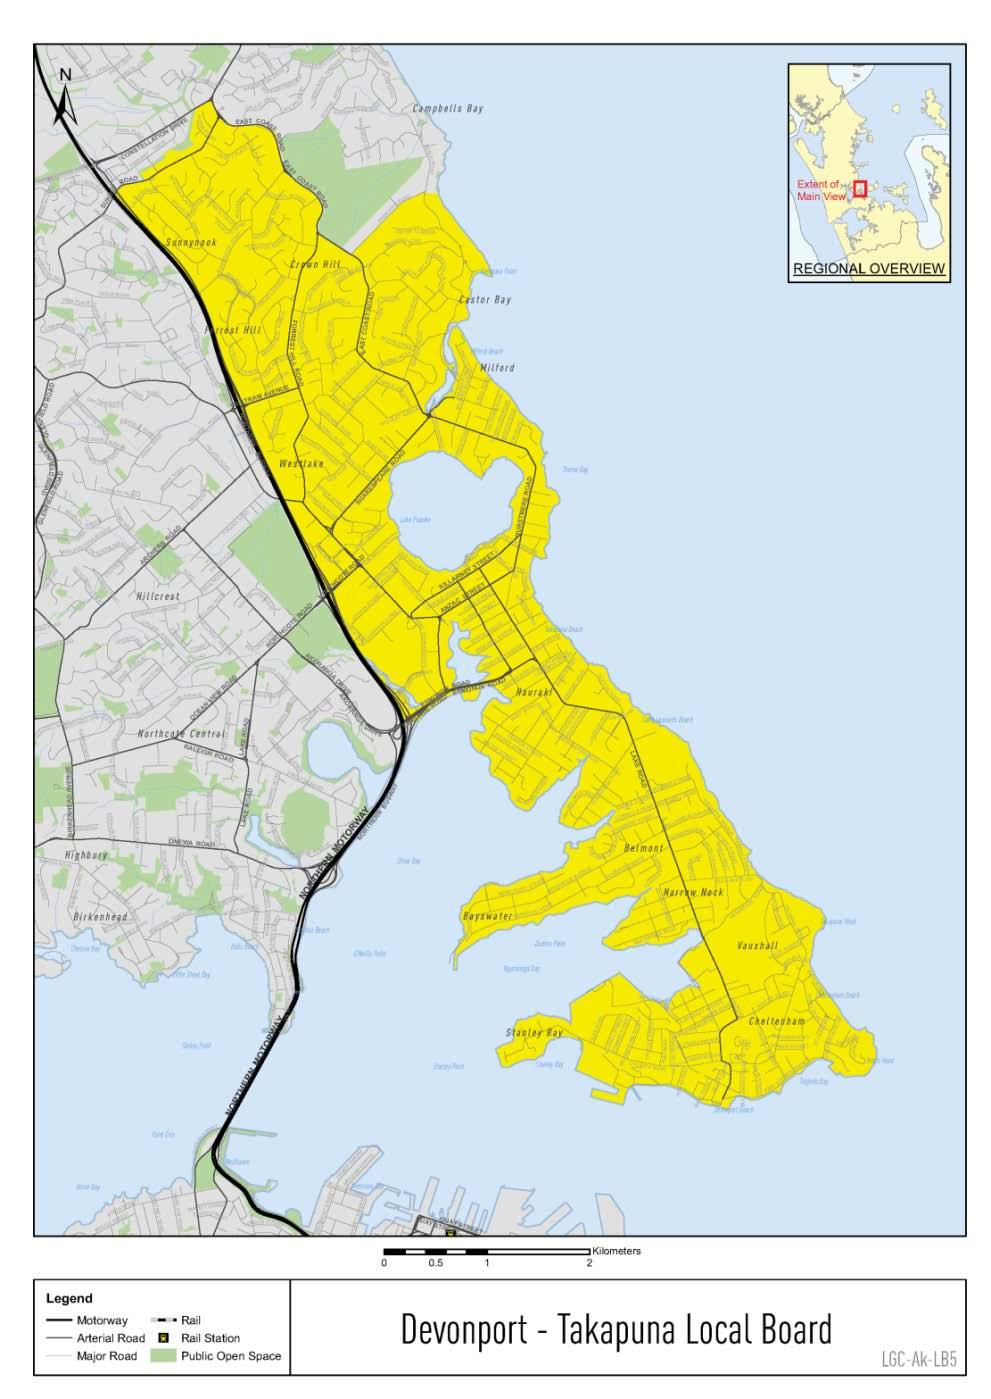 Map of Devonport-Takapuna Local Board area This report is part of a broader series of Census reports being developed by the Research, Investigations and Monitoring Unit at Auckland Council.